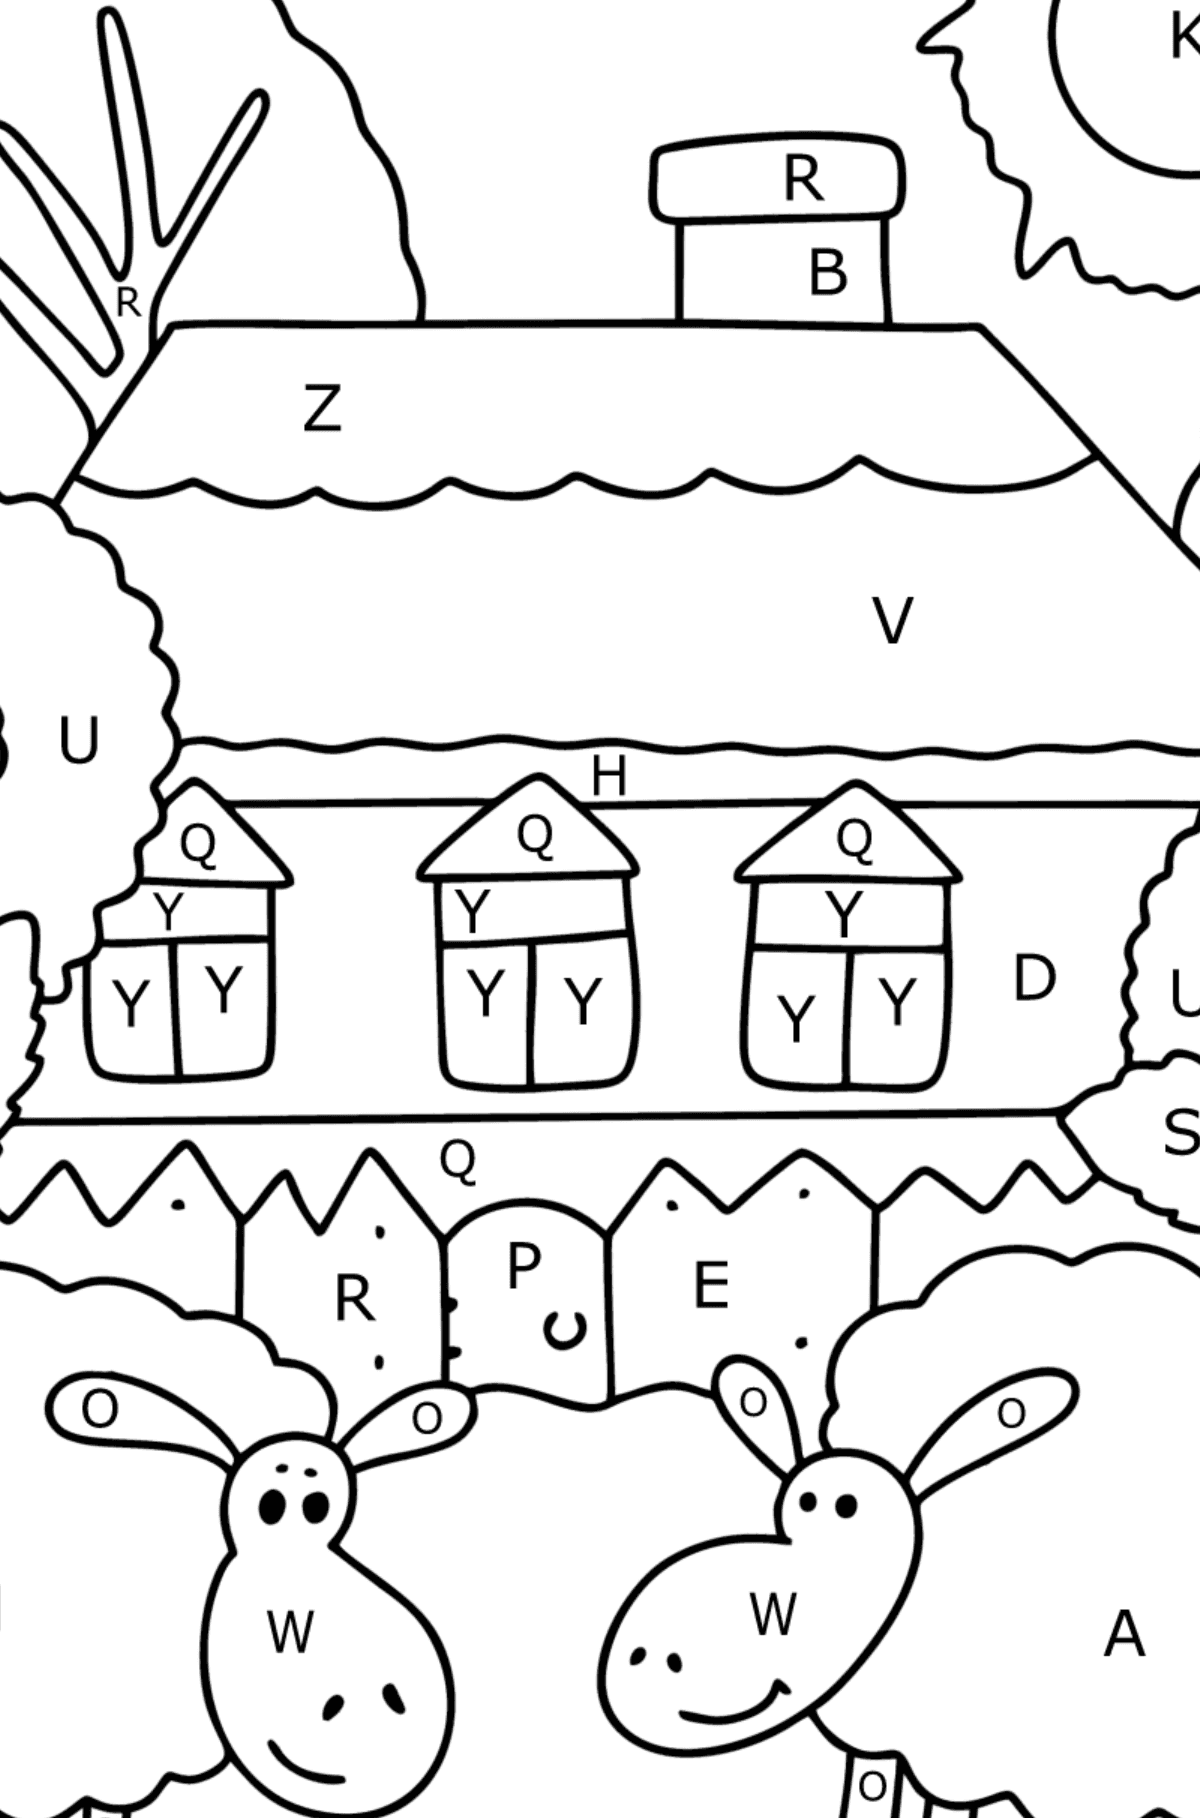 FarmHouse coloring page - Coloring by Letters for Kids